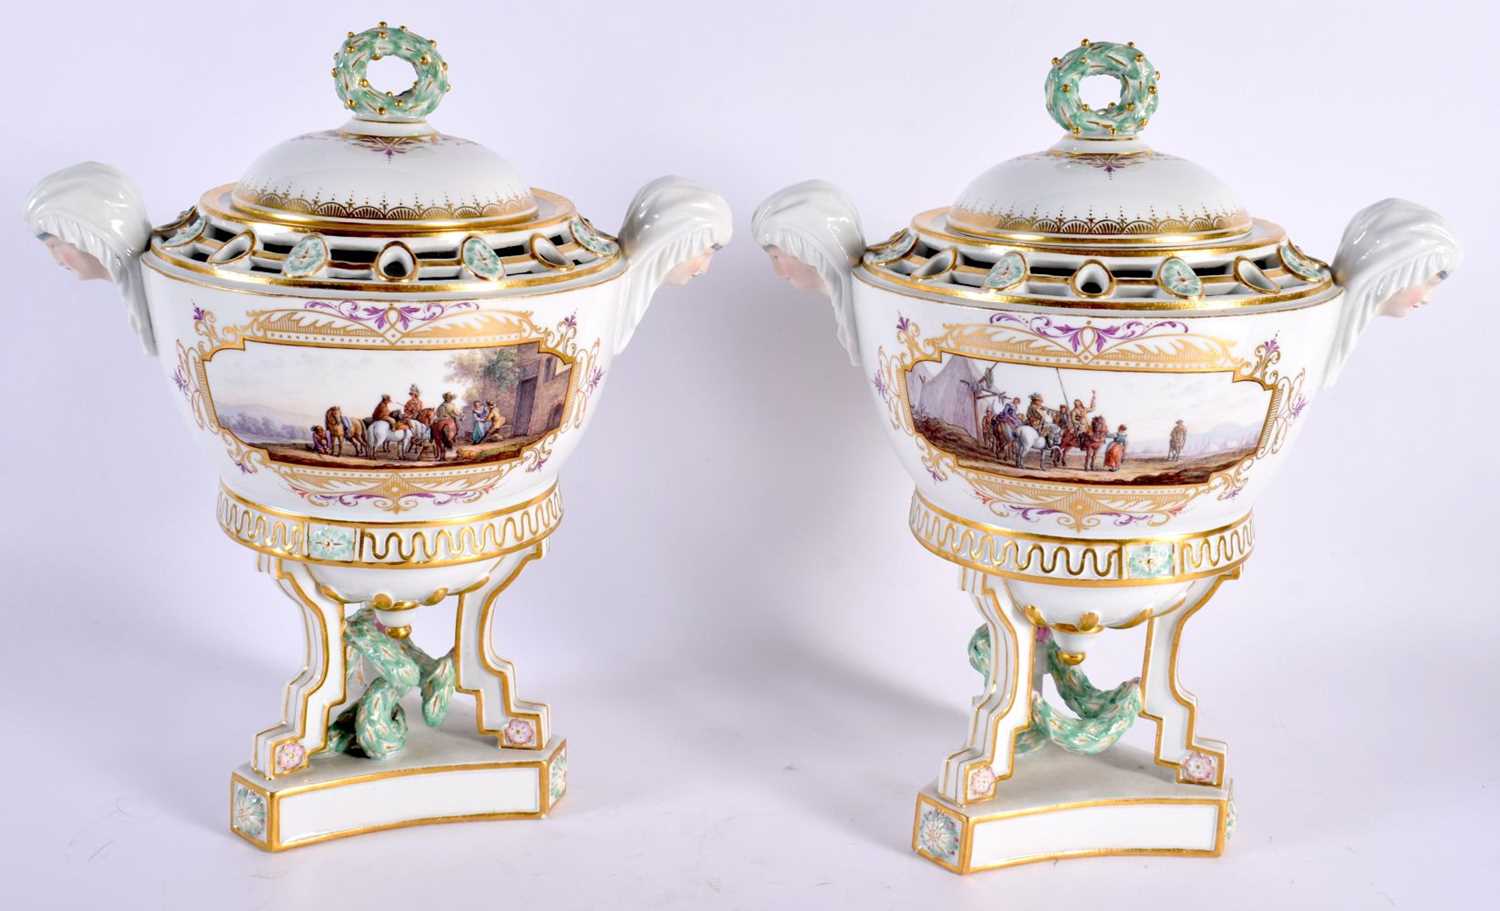 A FINE PAIR OF 19TH ENTURY MEISSEN POT-POURRI VASES AND COVERS with blue crossed swords marks,